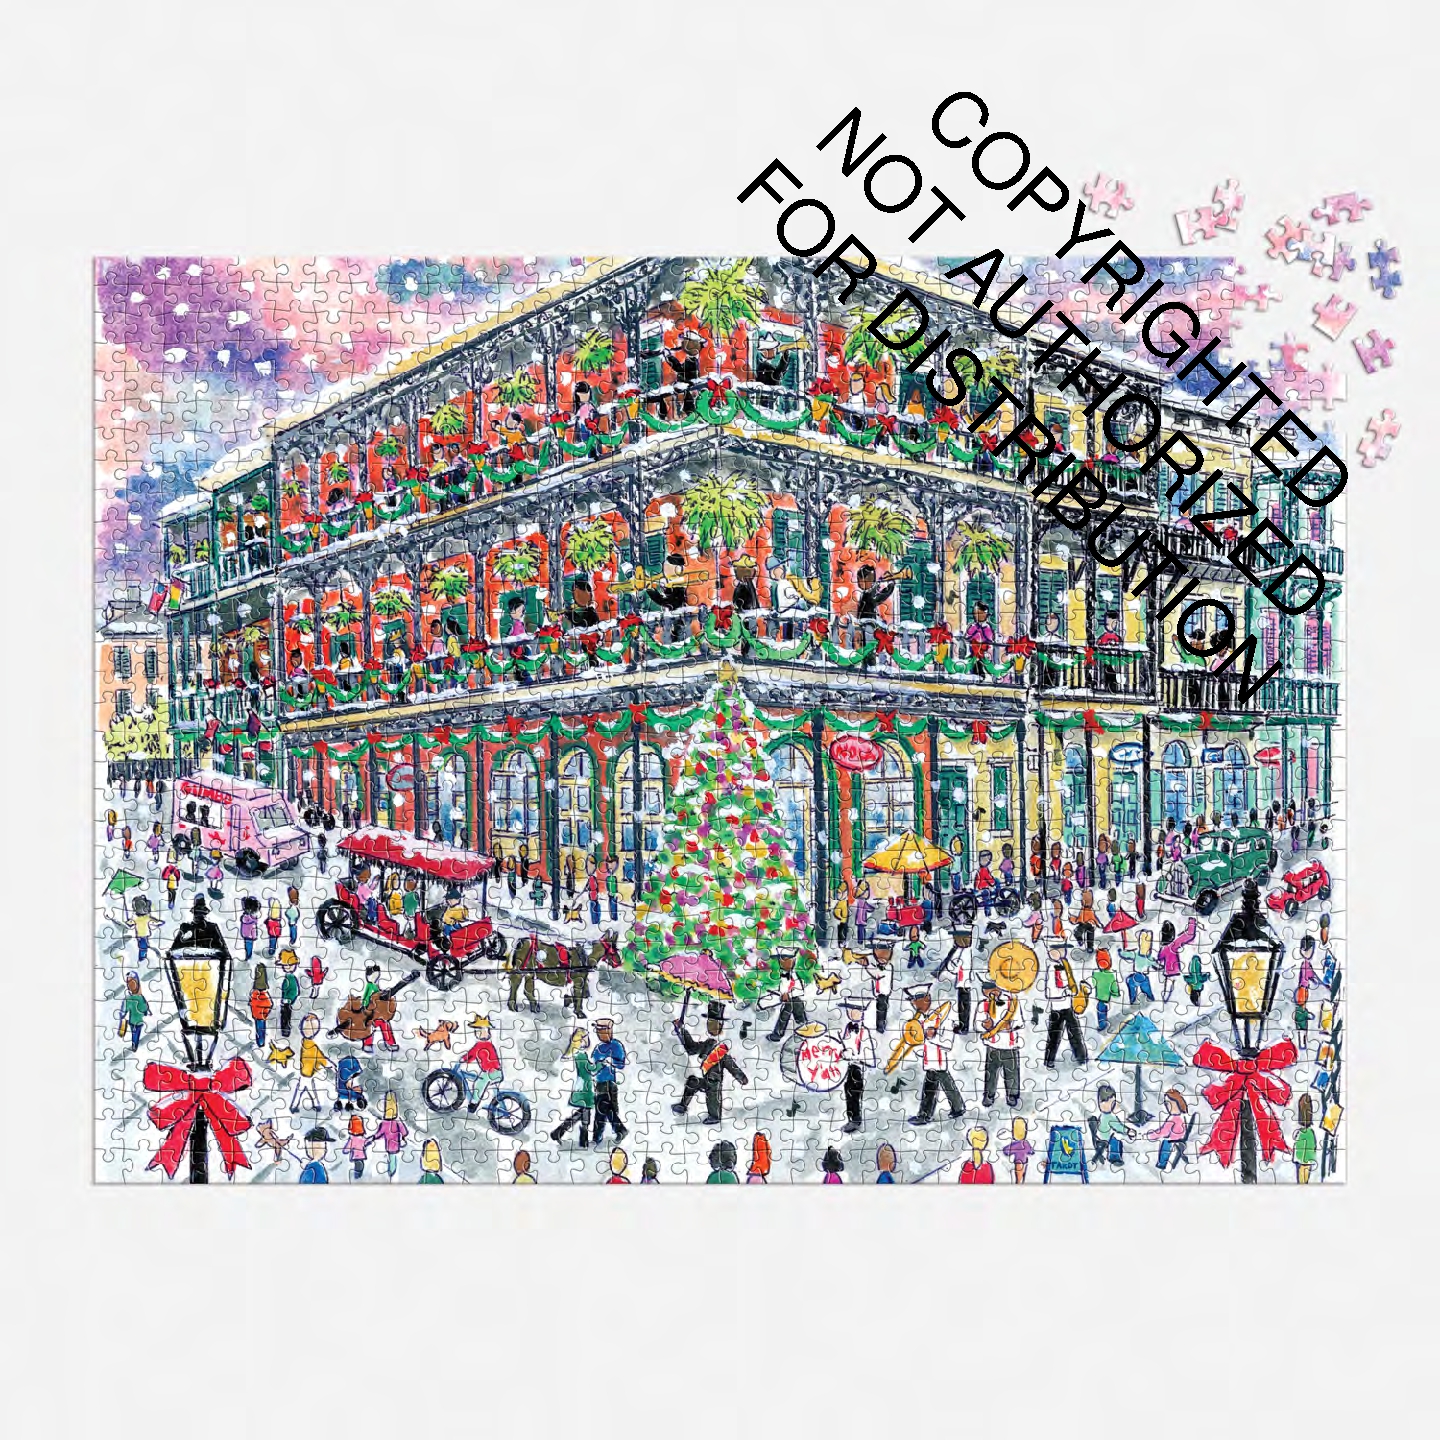 Michael Storrings Christmas in New Orleans 1000 Piece Puzzle with Square Box